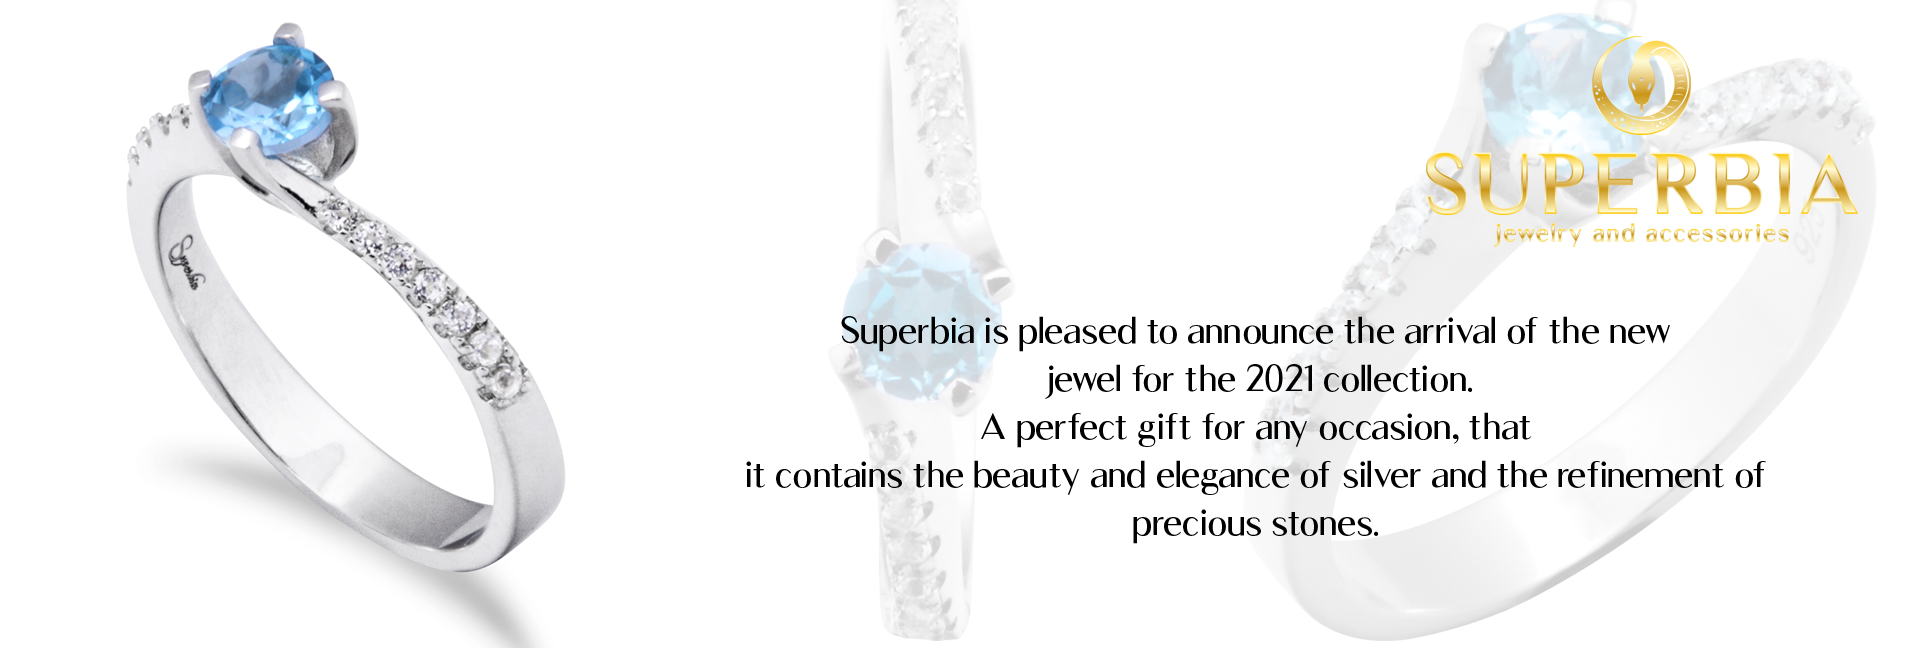 Superbia New Collection